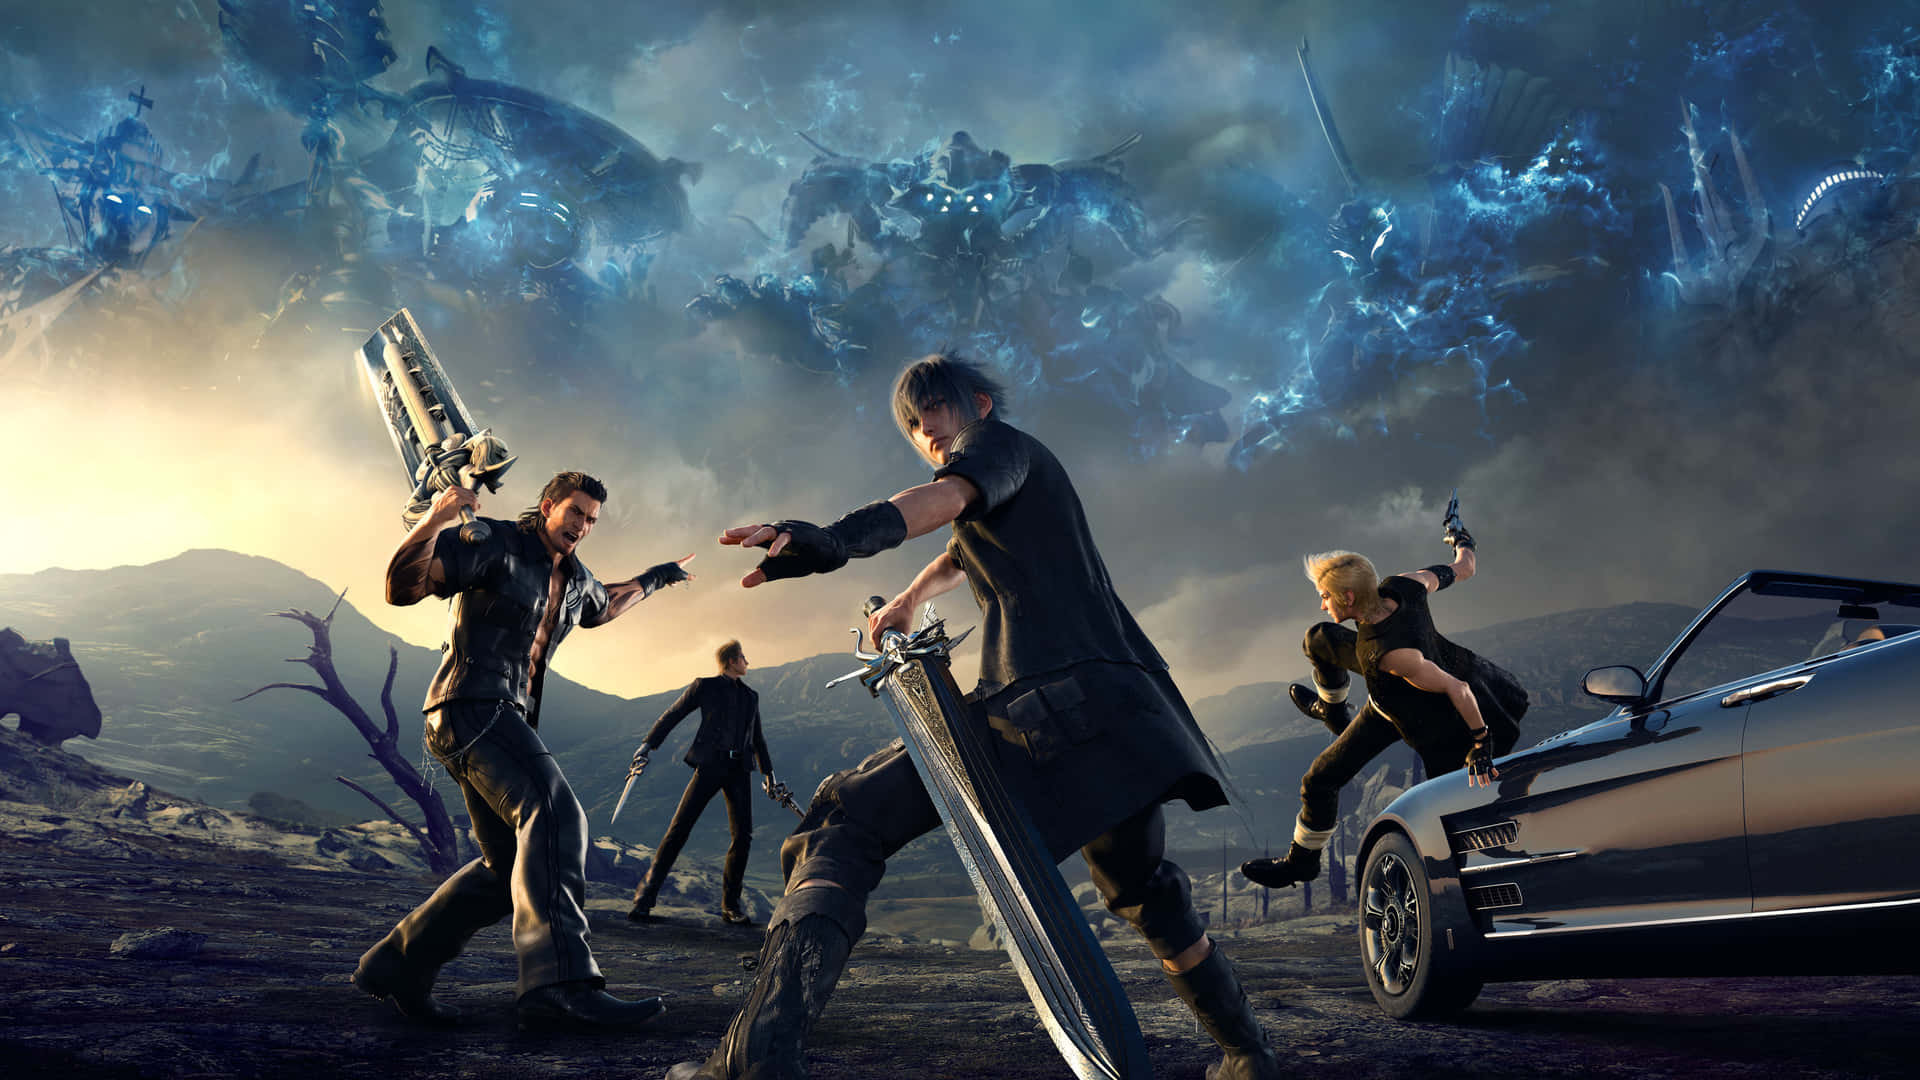 Final Fantasy Xiv - Ps4 Is Translated As 